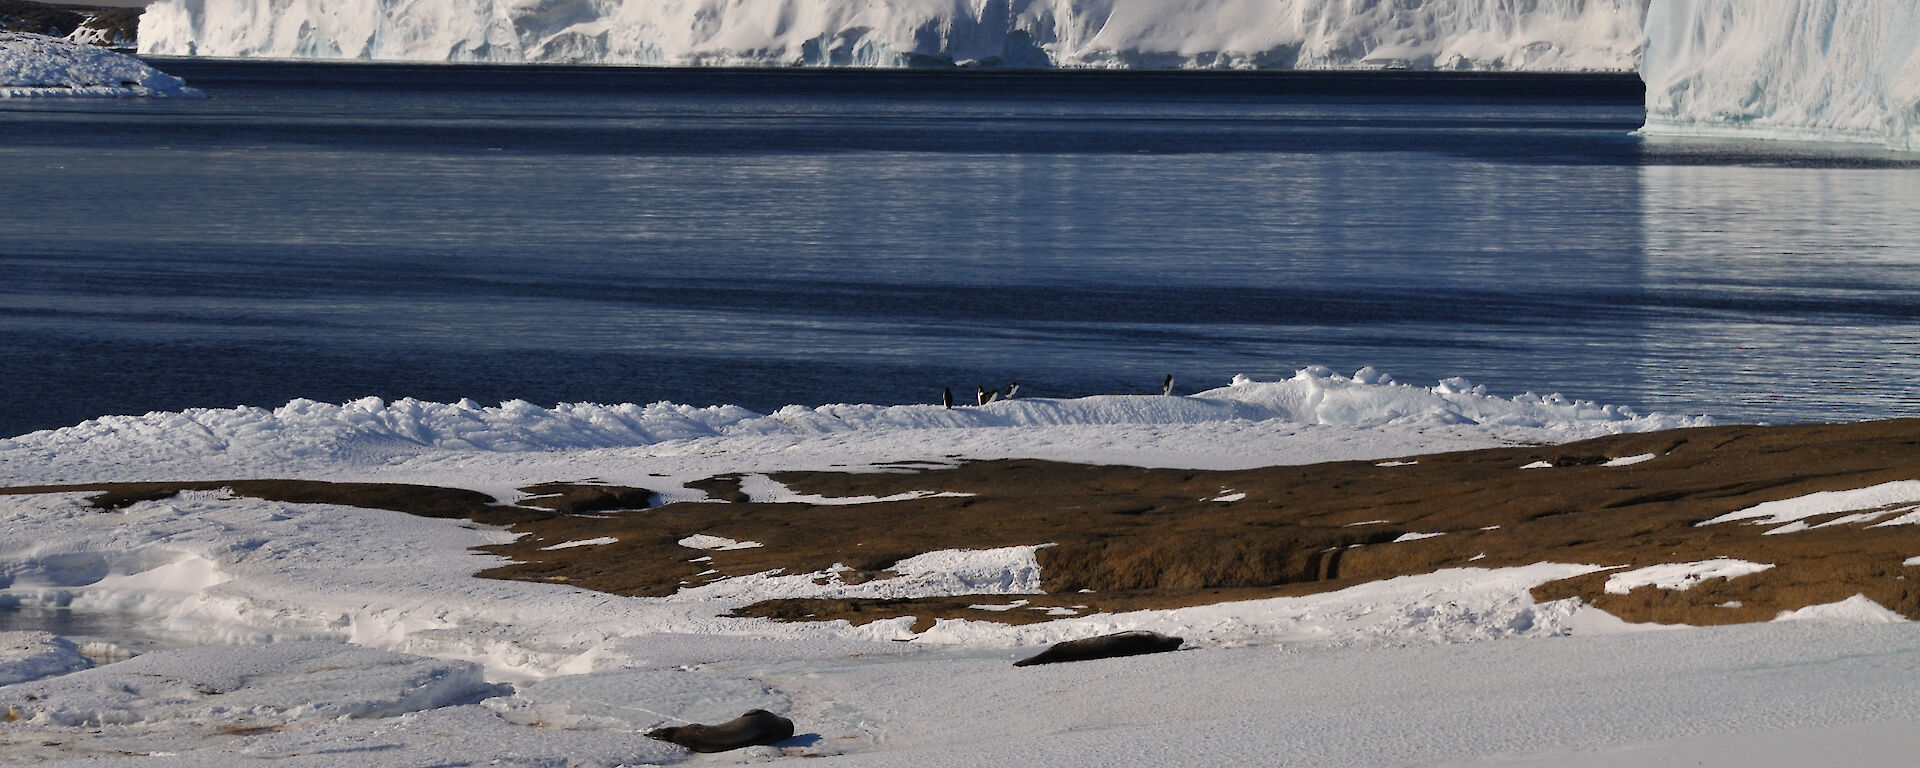 Weddell Seals and , Adelie Penguins on the ice edge in East bay from Petes Window